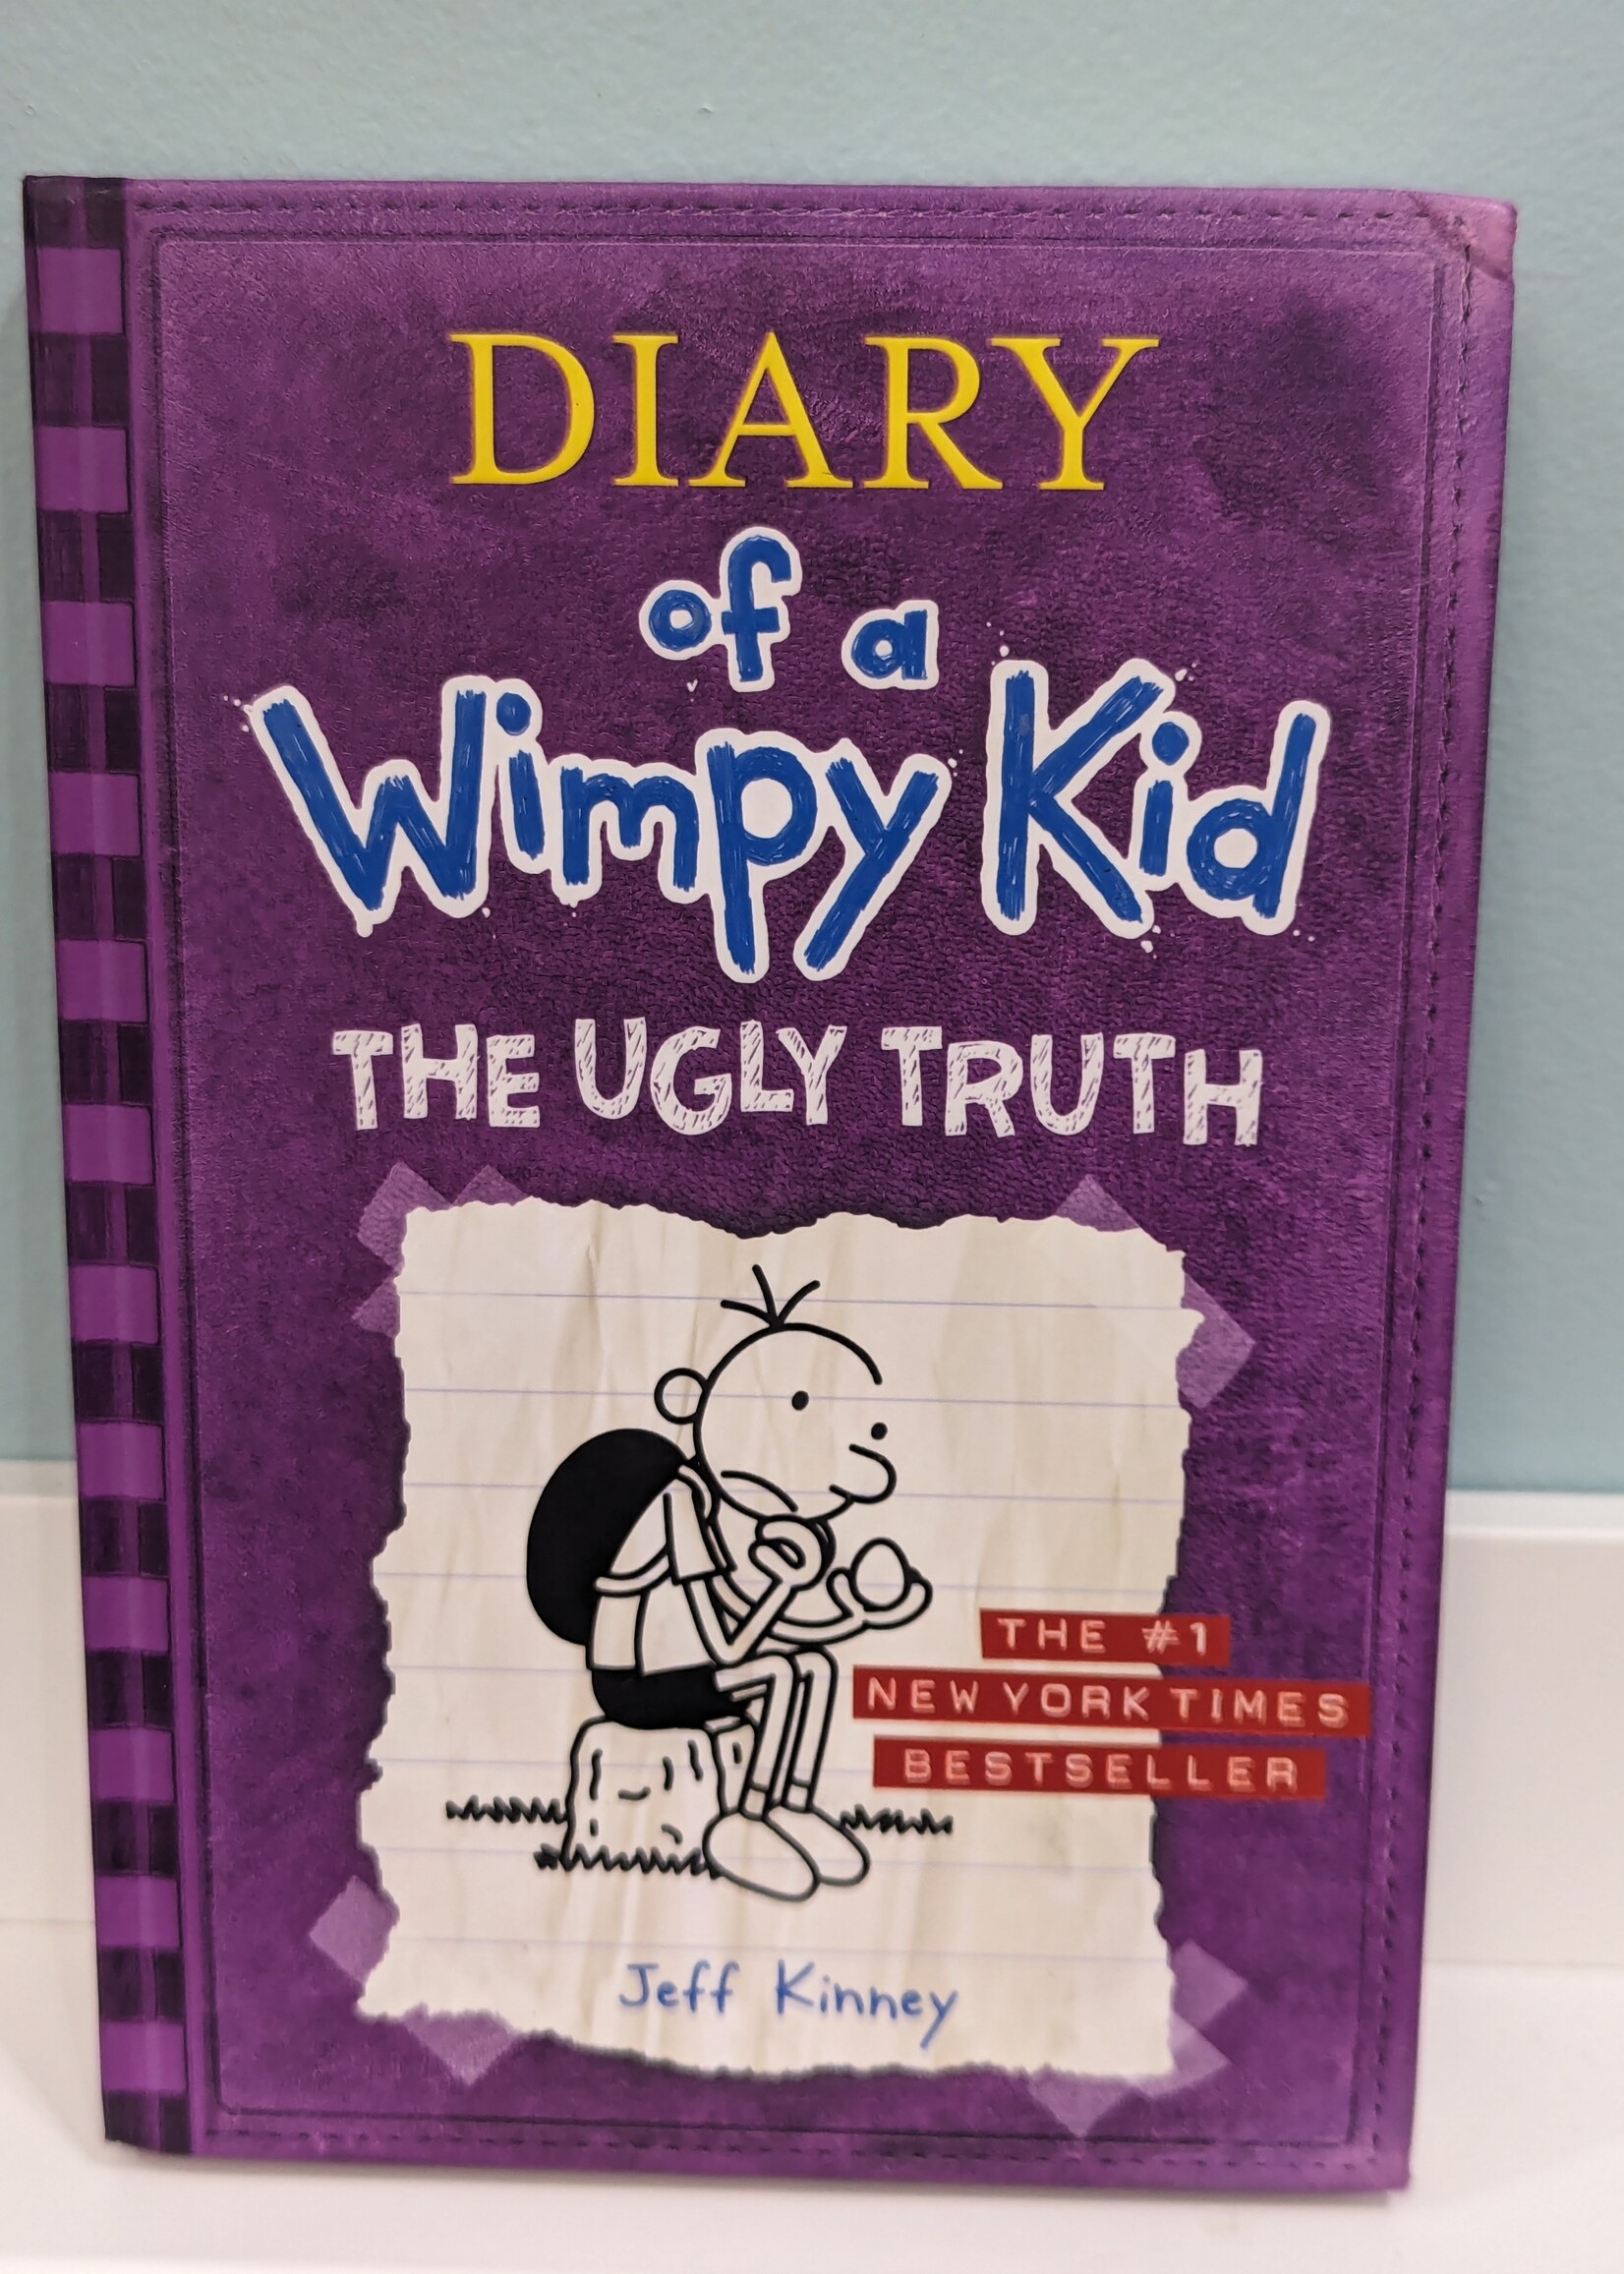 Abrams Books Diary of a Wimpy Kid: The Ugly Truth #5